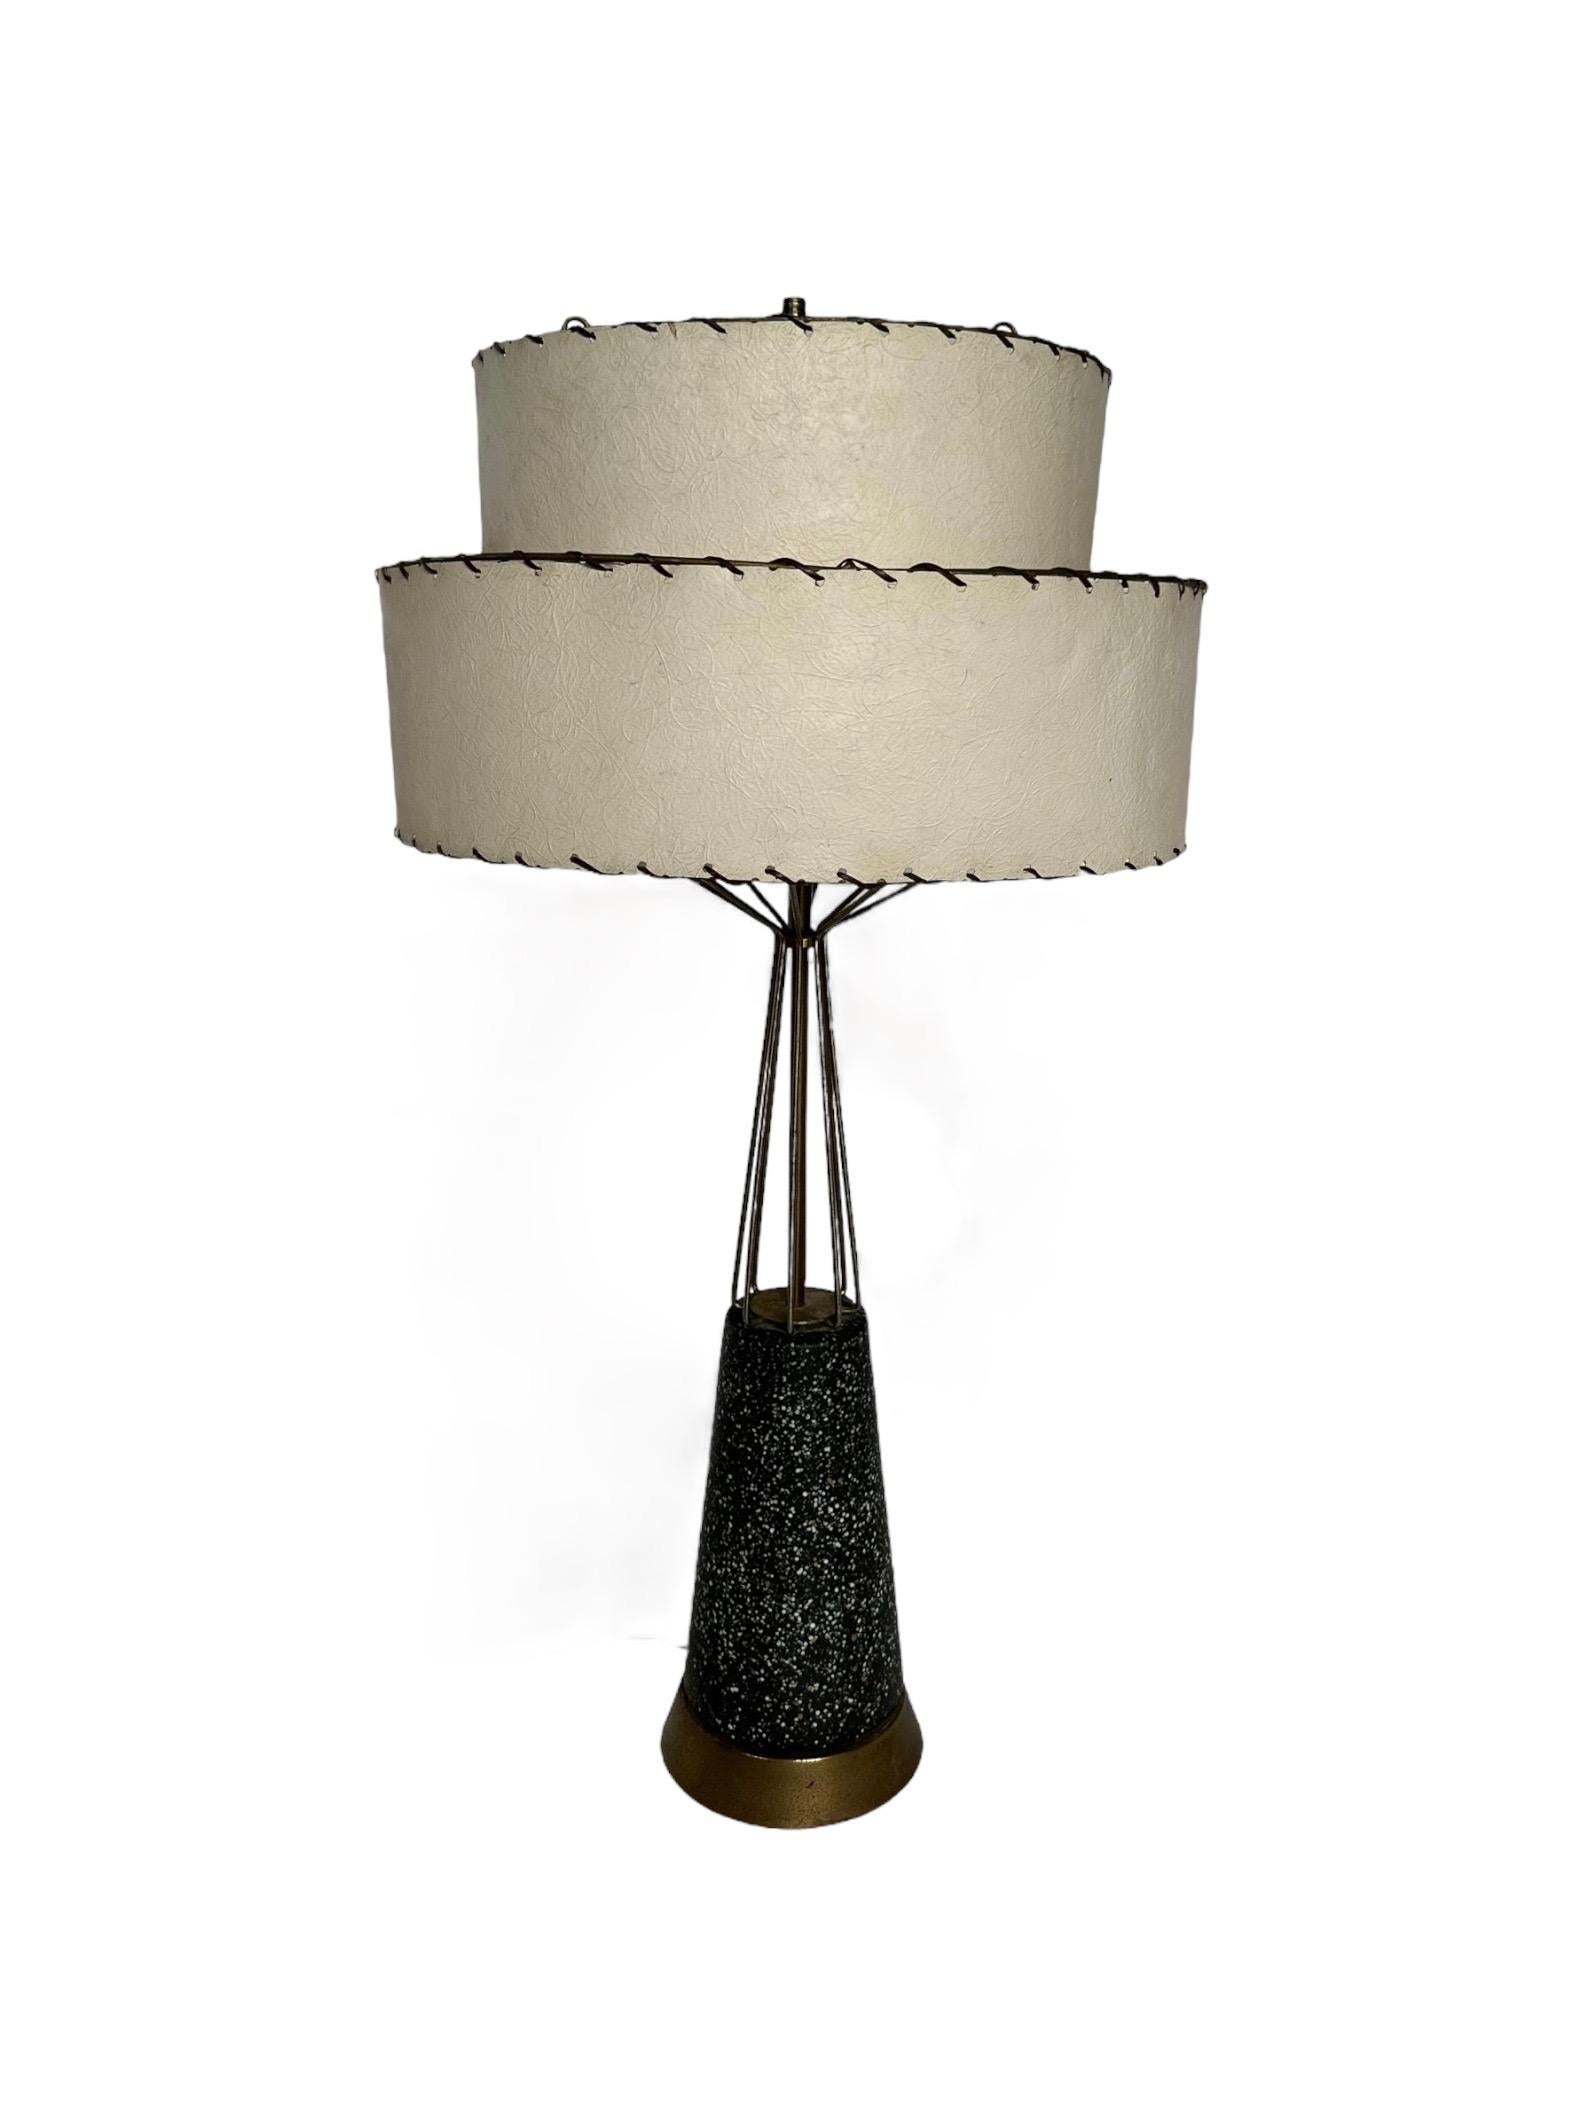 20th Century Mesmerizing Unique Mid-Century Modern Tall Table Lamp For Sale